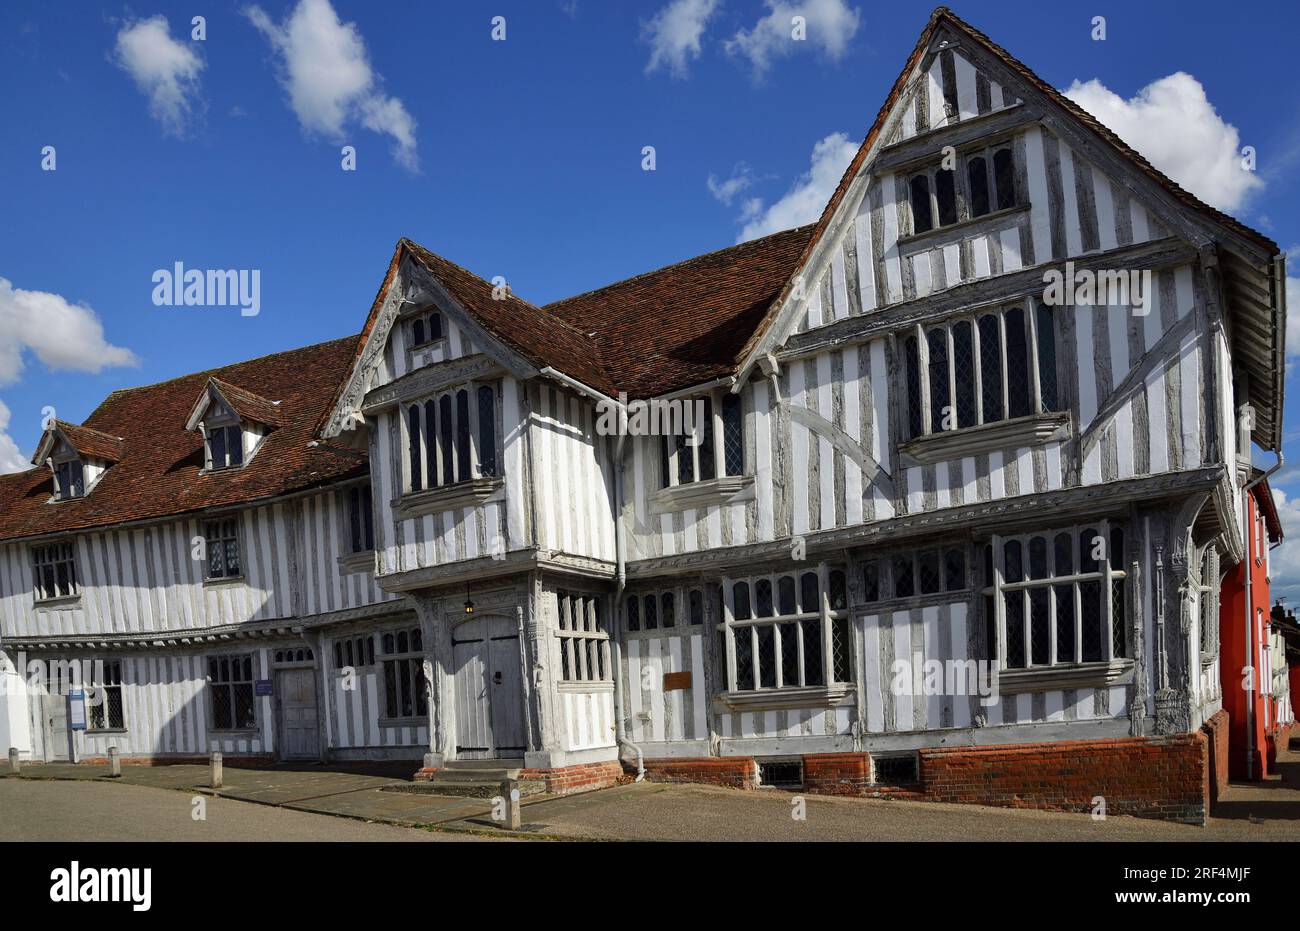 Lavenham Guildhall a magnificent medieval timber framed building in the Suffolk village of Lavenham, Sudbury, Suffolk Stock Photo